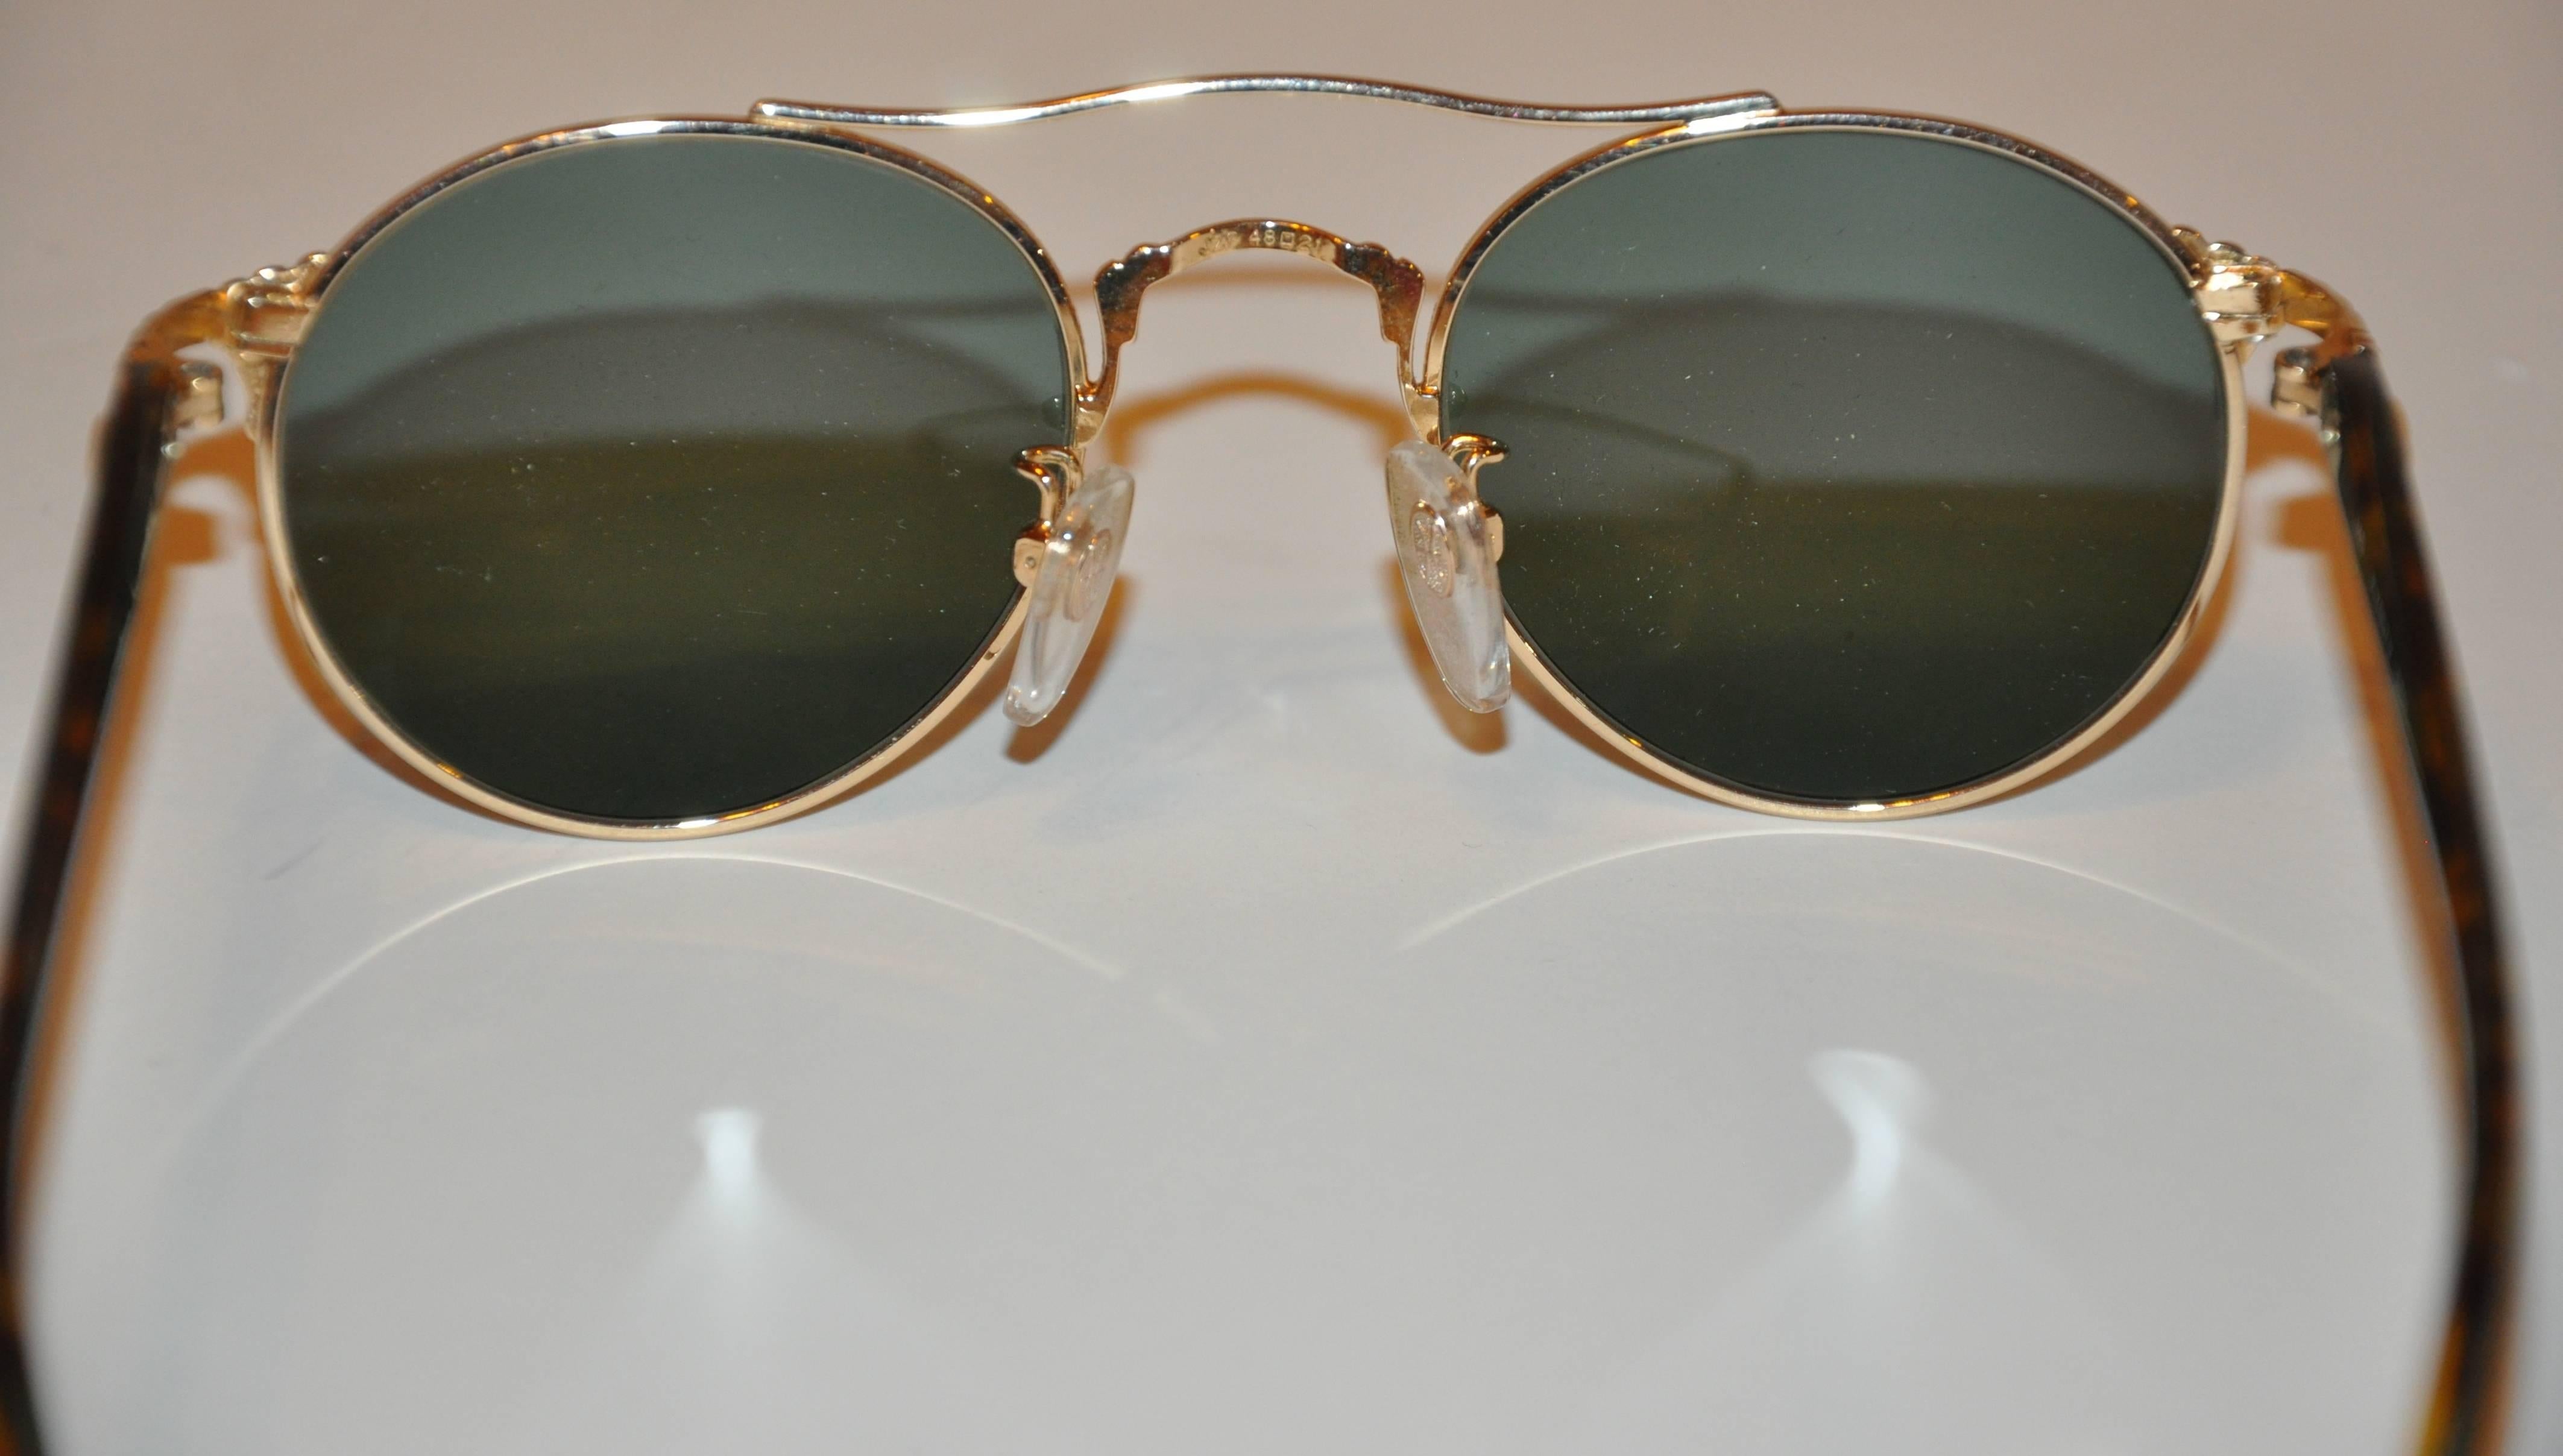        Kansai Yamamoto wonderfully detailed gilded gold hardware sunglasses are accented with etched hardware along the front as well as the arm's corners. The arms are accented with tortoise shell near the ends for better comfort. The width across